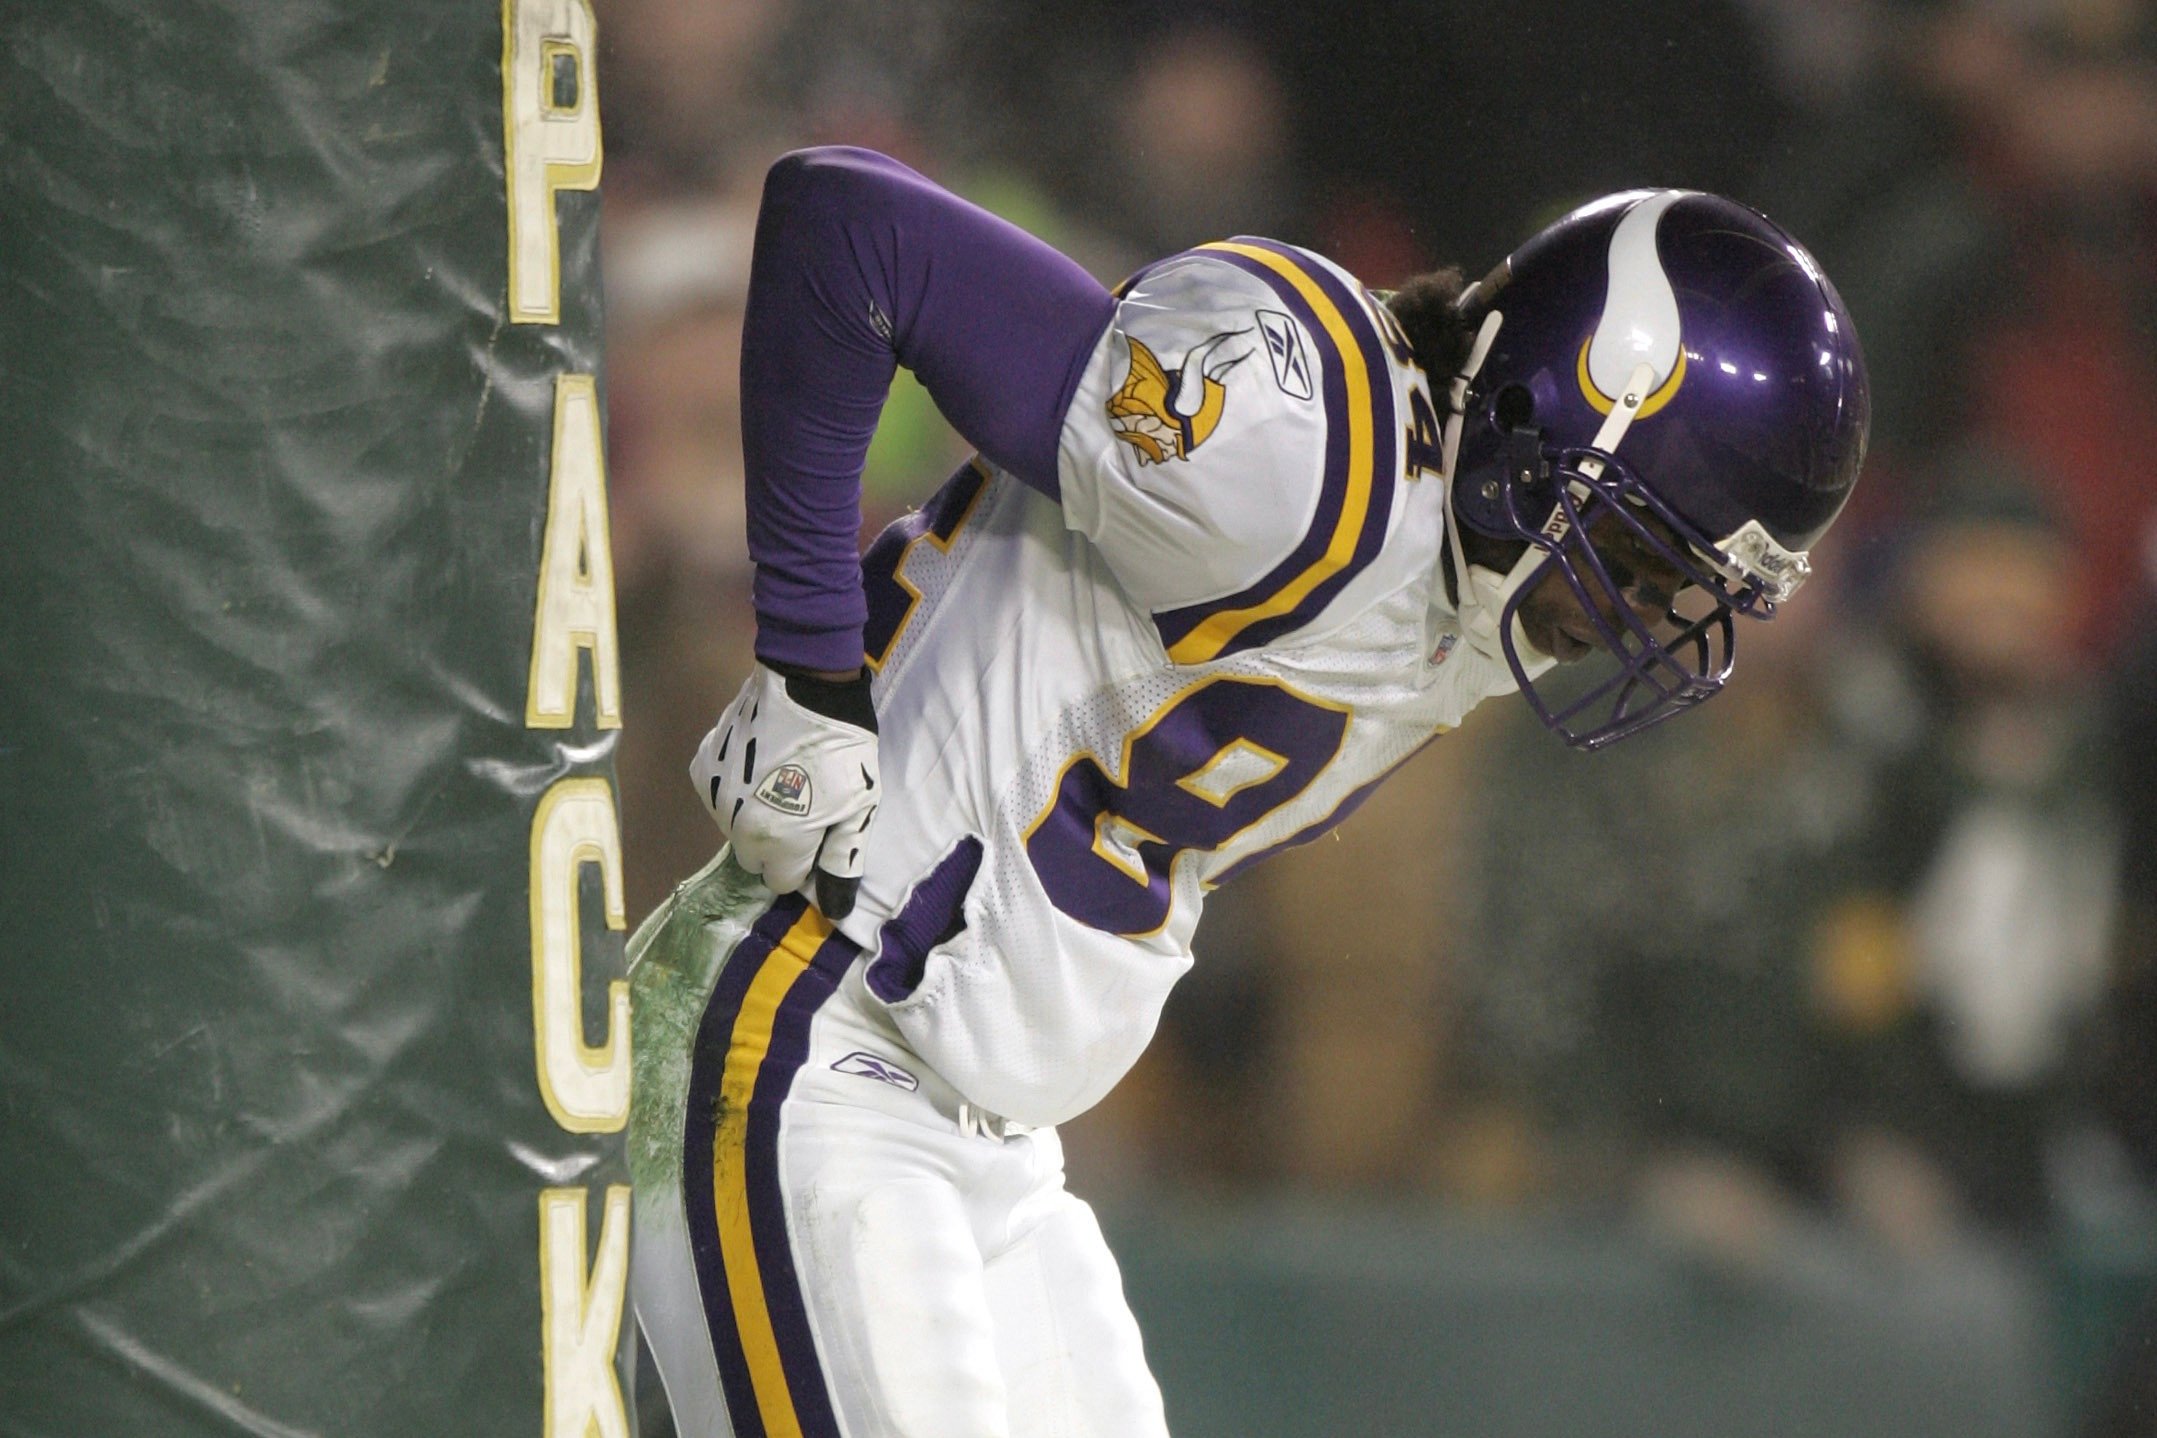 Joe Buck Acknowledges Over-the-Top Call Of Randy Moss’ “Mooning” Touchdown Celebration